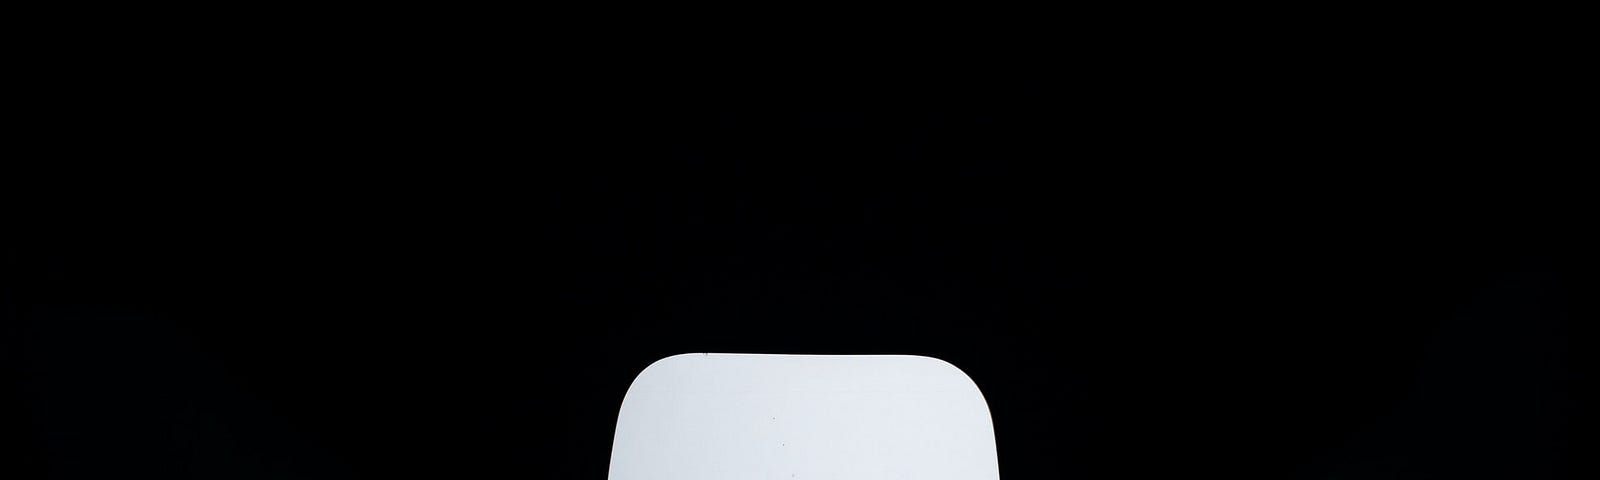 White chair on black background